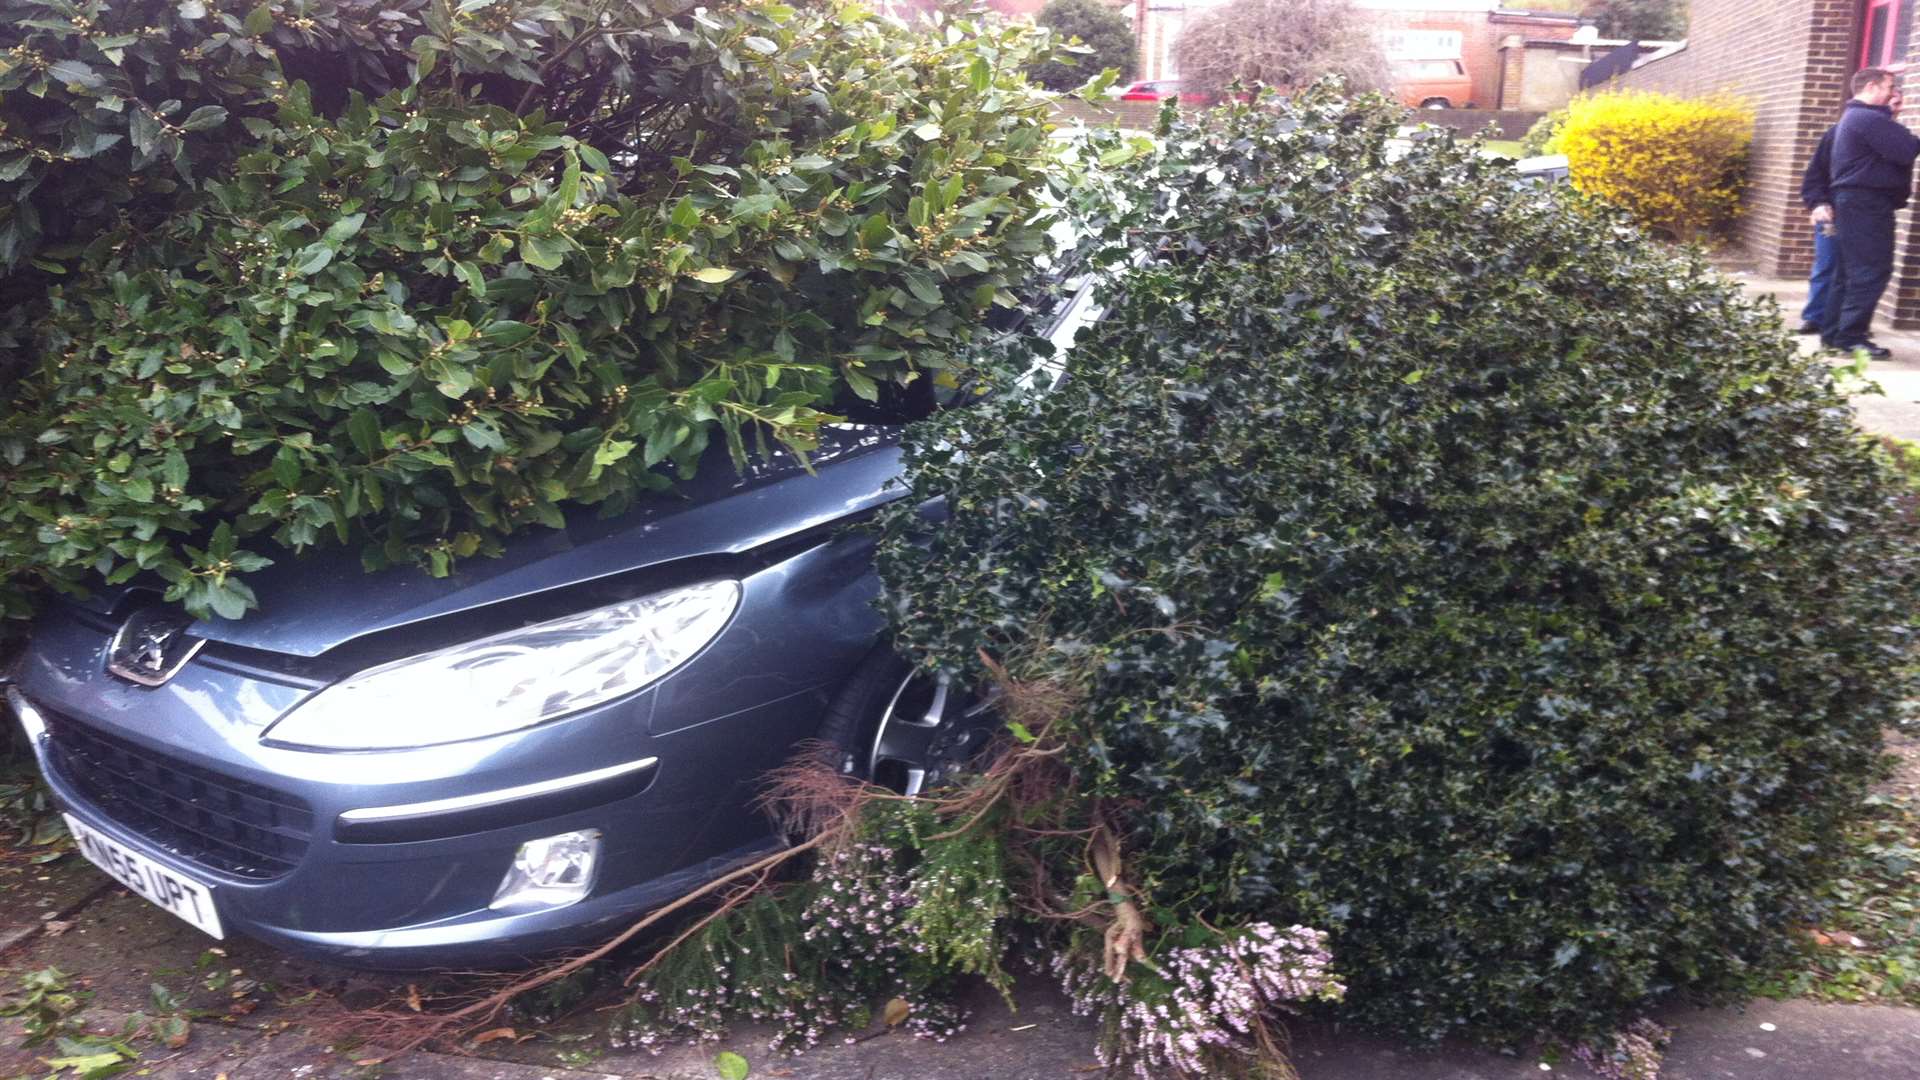 The car was wedged in the bush in Whitstable